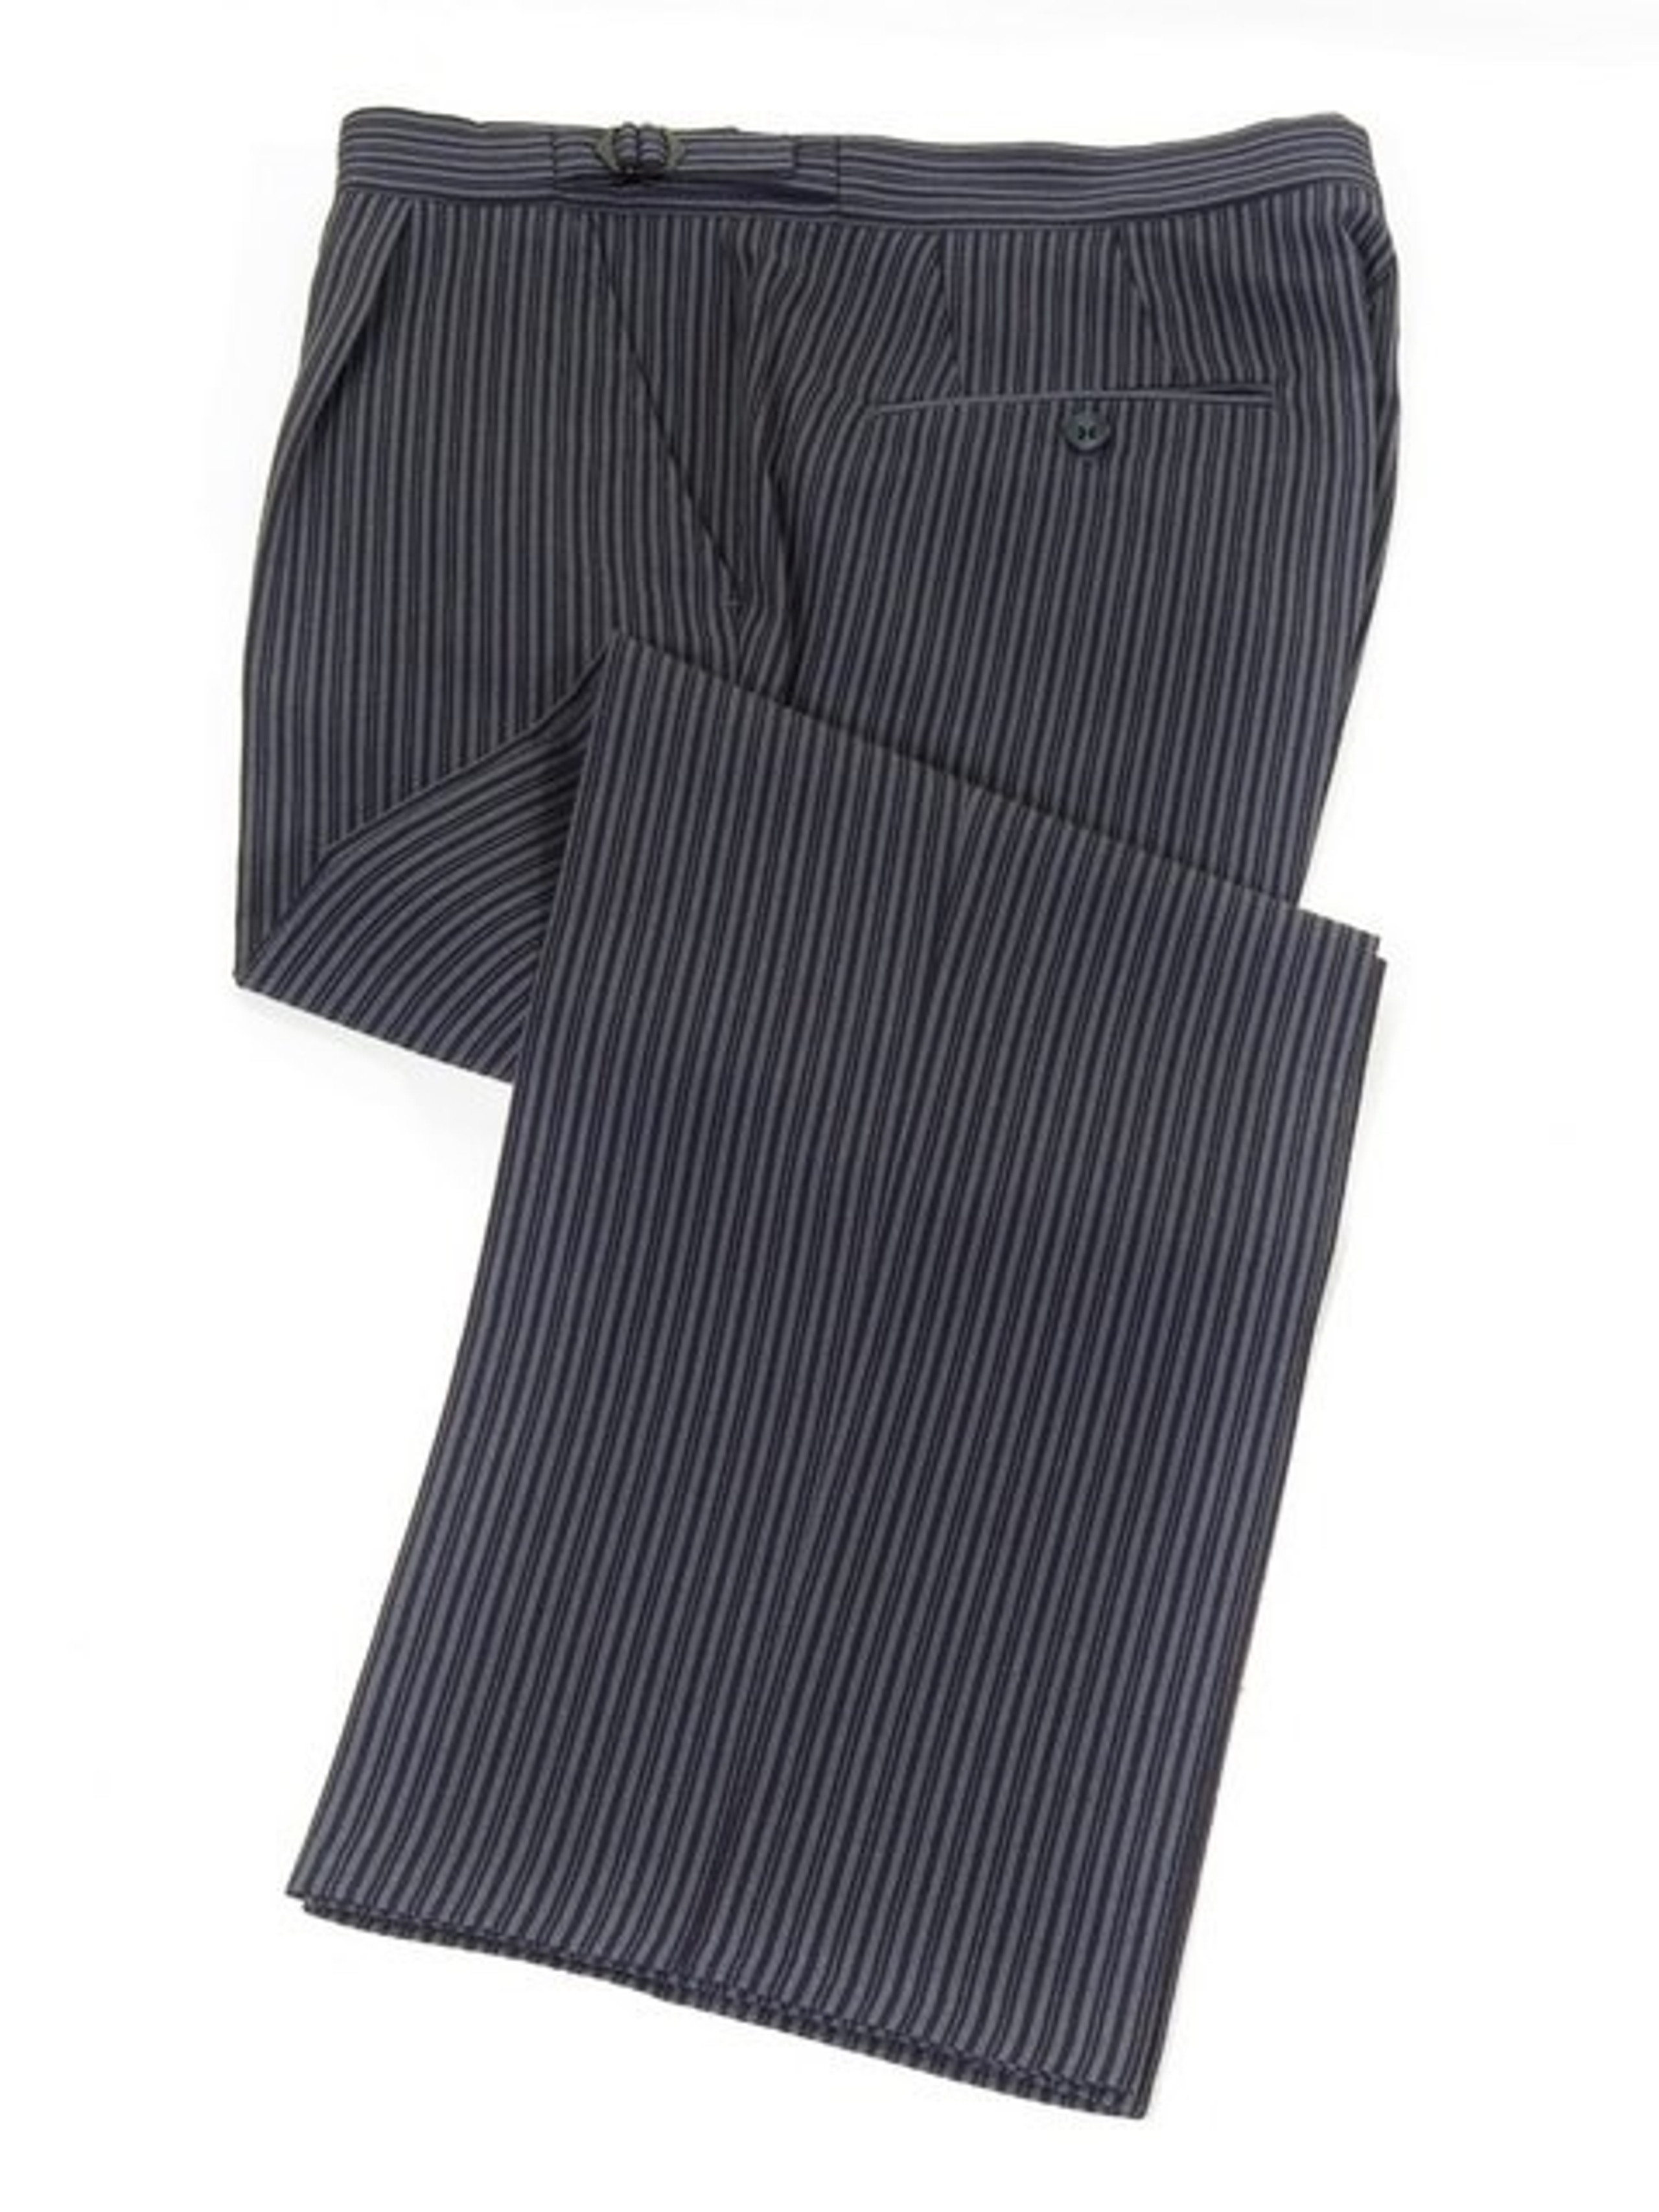 Ex-Hire Pinstripe Morning Trousers - Navy Blue Pin Stripe Morning Suit ...